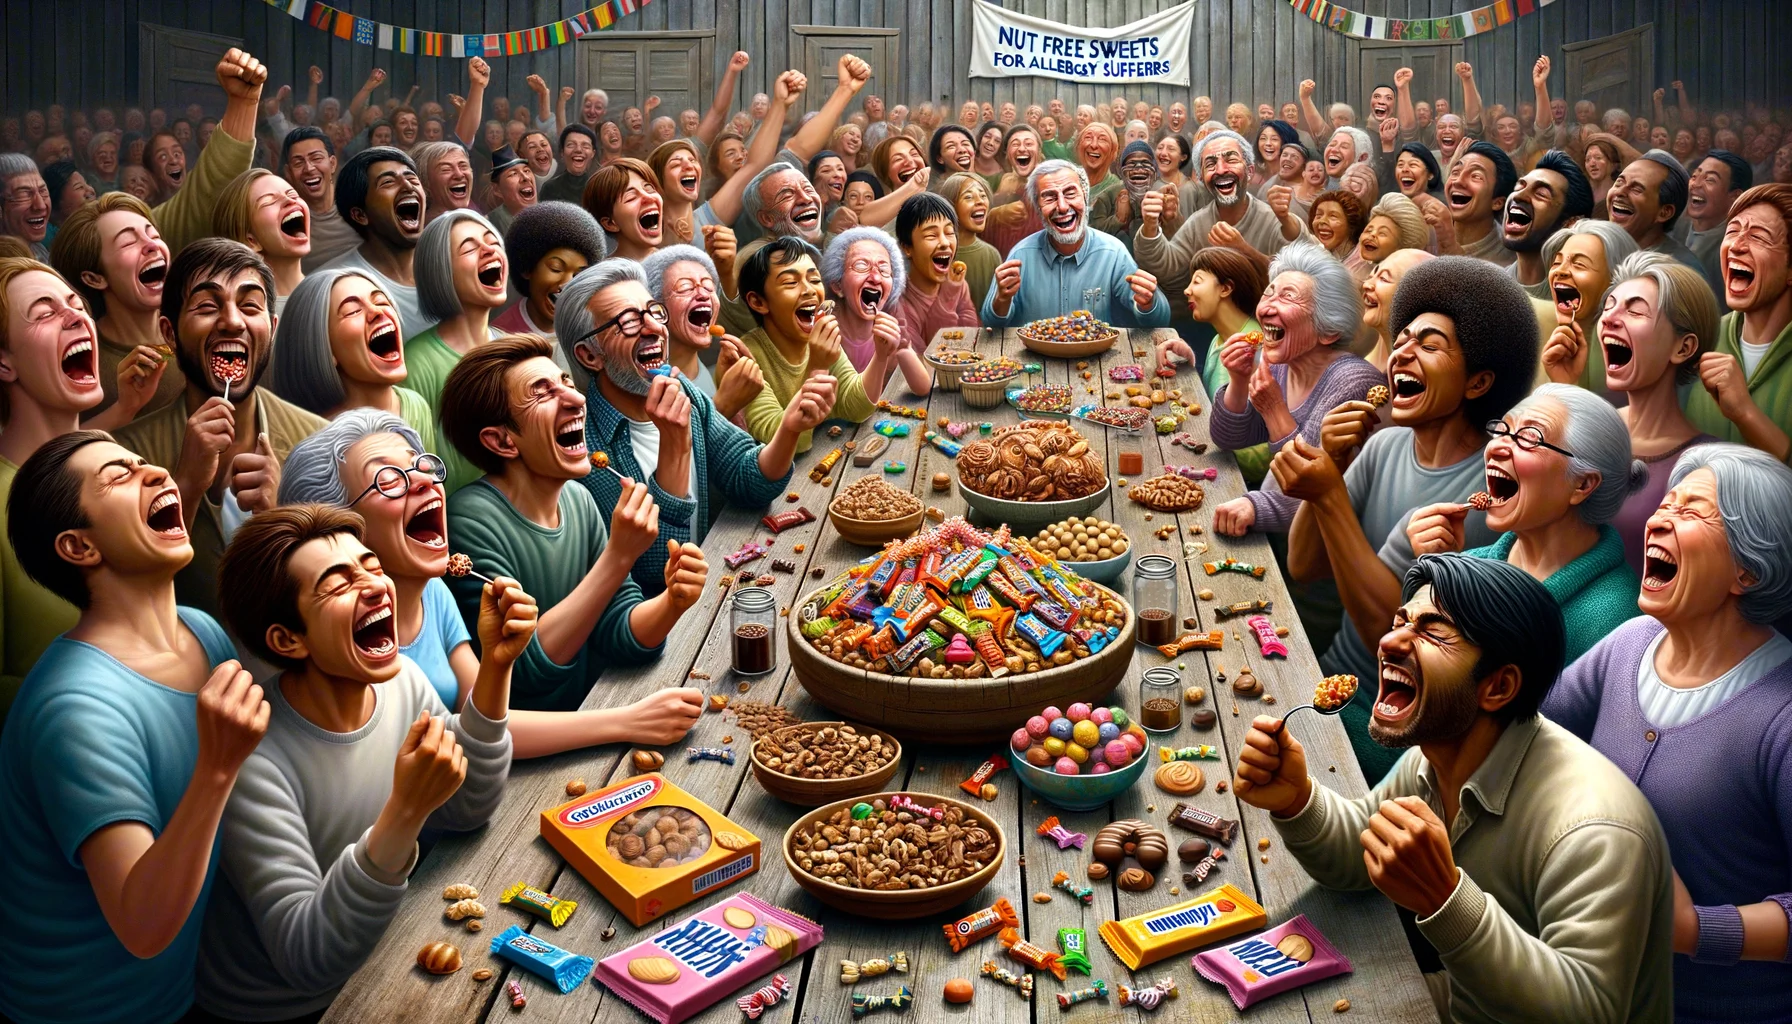 An amusing and strikingly realistic picture that conveys a scene of joy and delight. In the center, there is a large, rustic wooden table filled with a colorful assortment of nut-free sweets. The main characters are people of various ages and descents - teenagers of Middle-Eastern and Hispanic descent, adults of Black and Caucasian descent and elderly of South Asian and East Asian descent. All of them are enthusiastically devouring the sweets with great pleasure and their faces express pure joy. Around them, you can feel an atmosphere of community and happiness. In the background, a banner flies high with the words 'Nut-Free Sweets for Allergy Sufferers'. This scenario perfectly encapsulates the joy of inclusivity in diet and lifestyle.